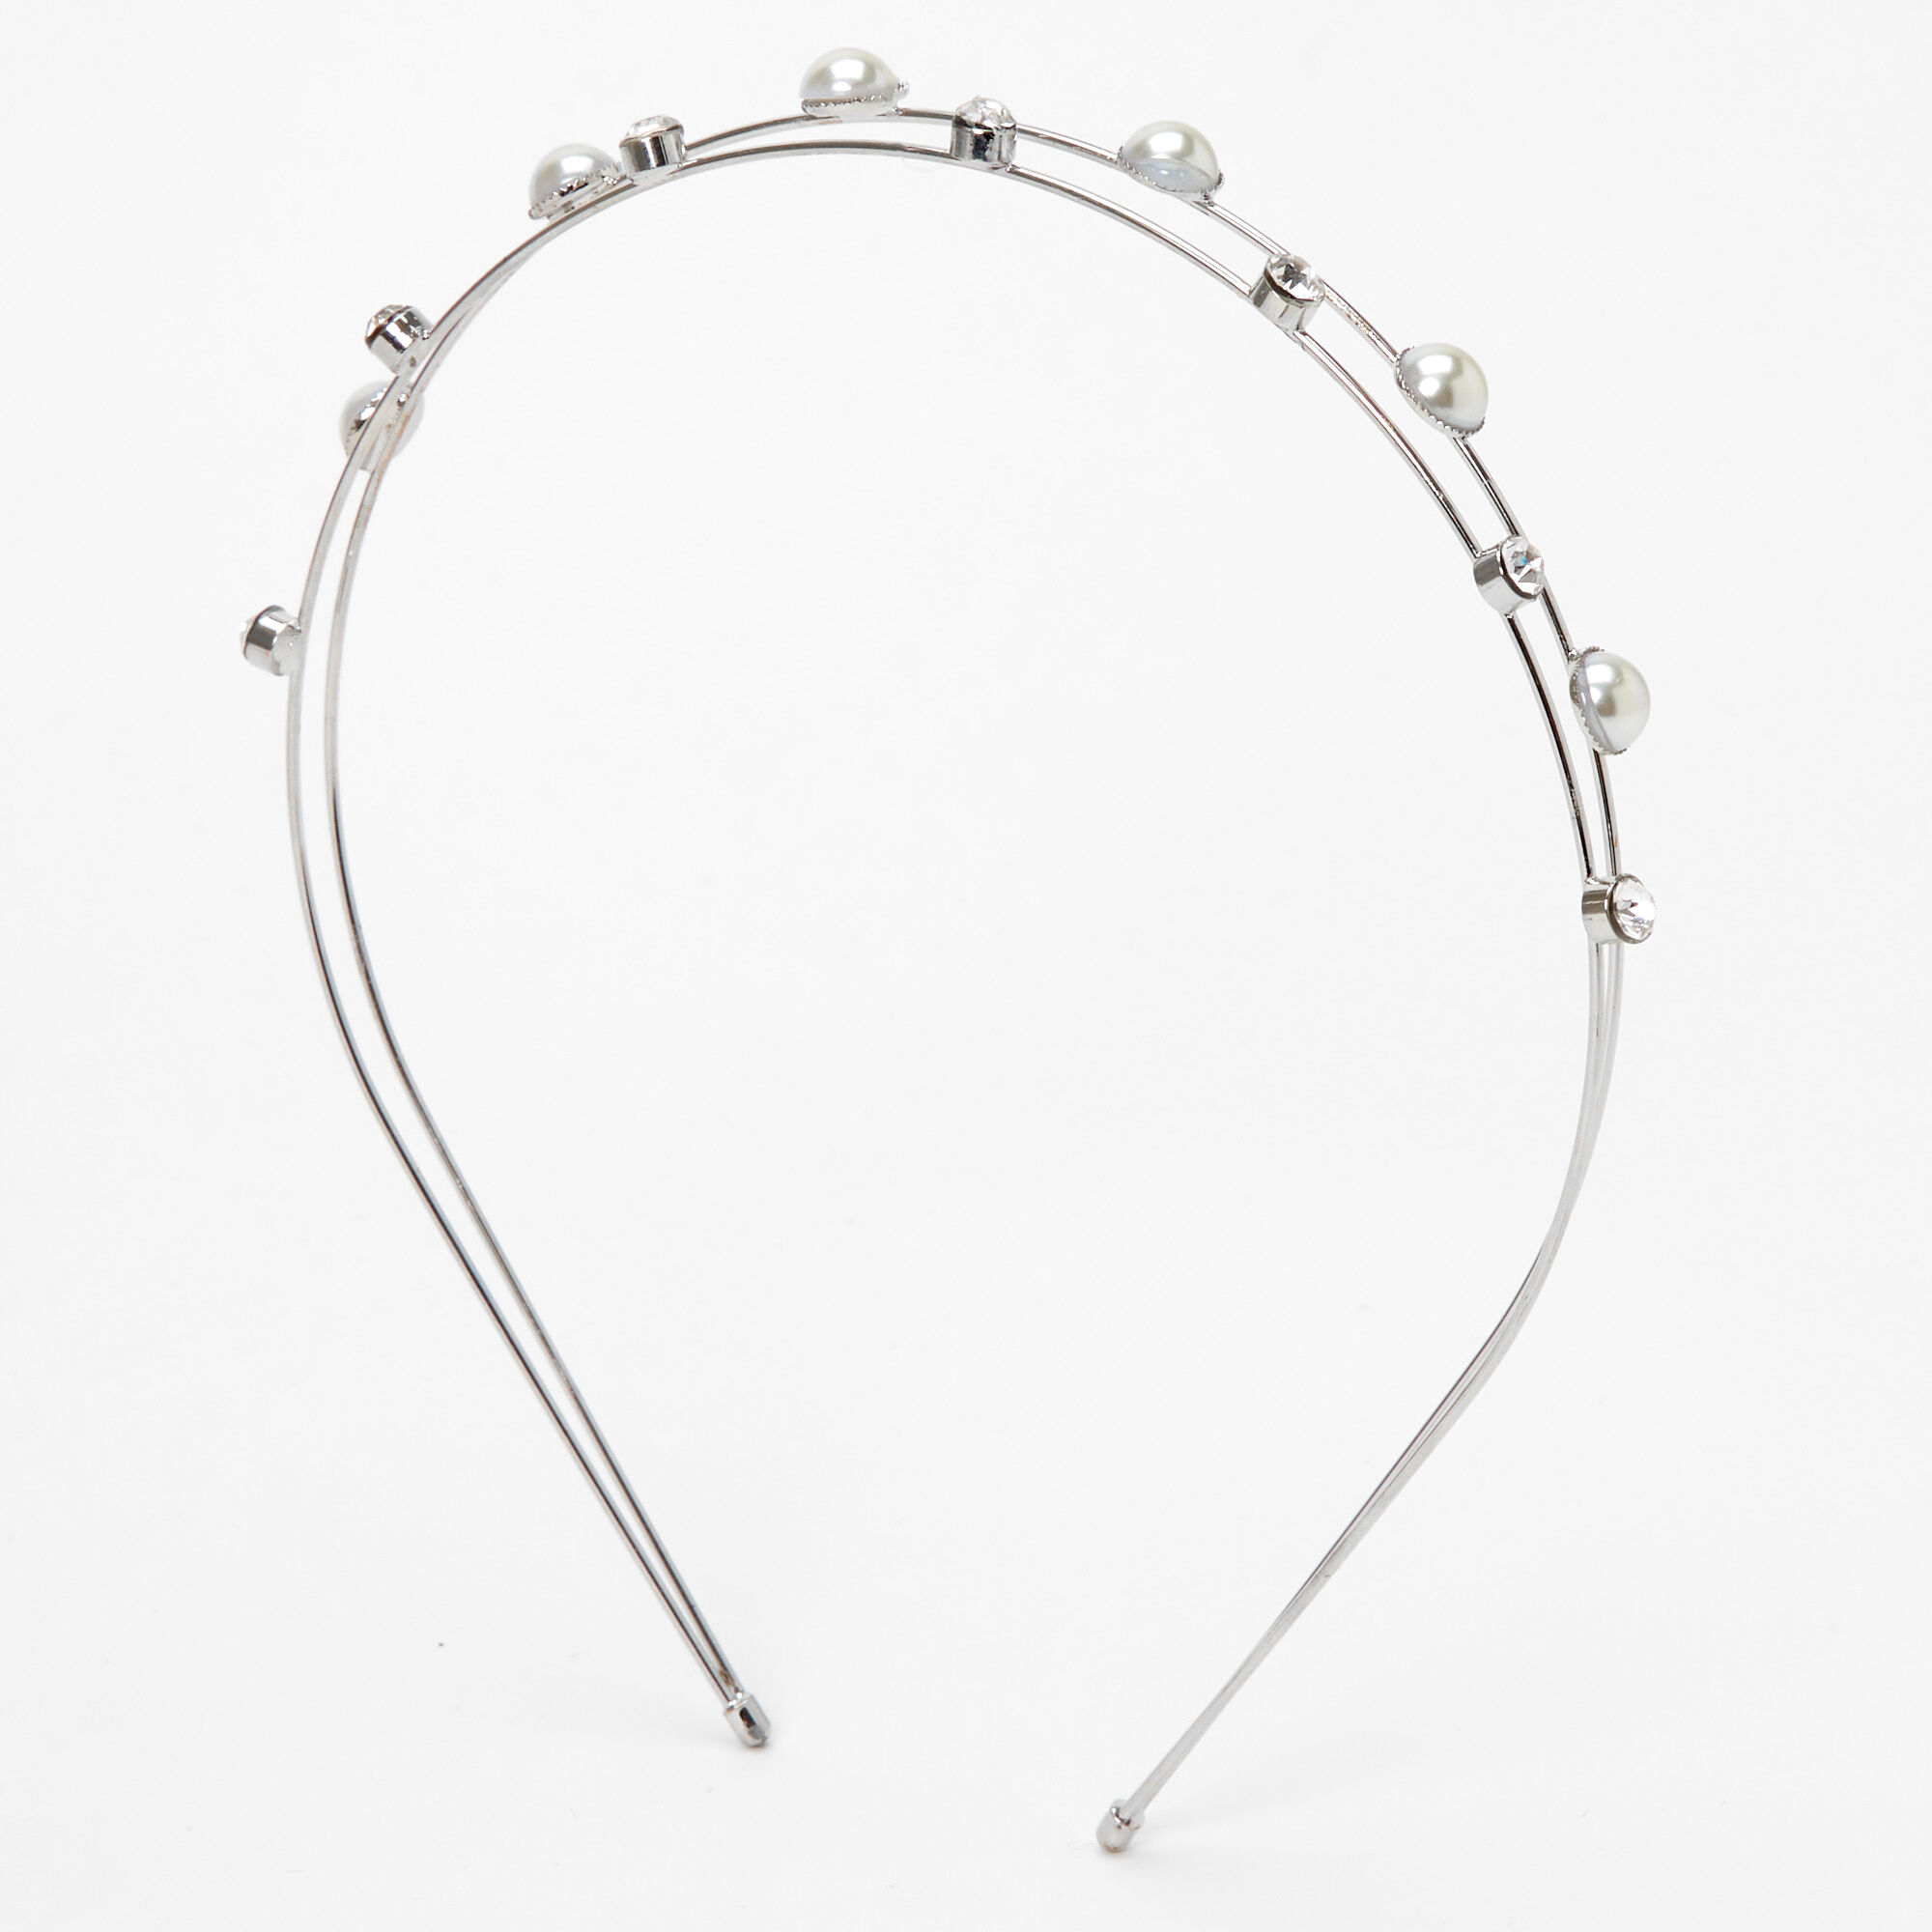 View Claires Double Row Embellished Headband Silver information